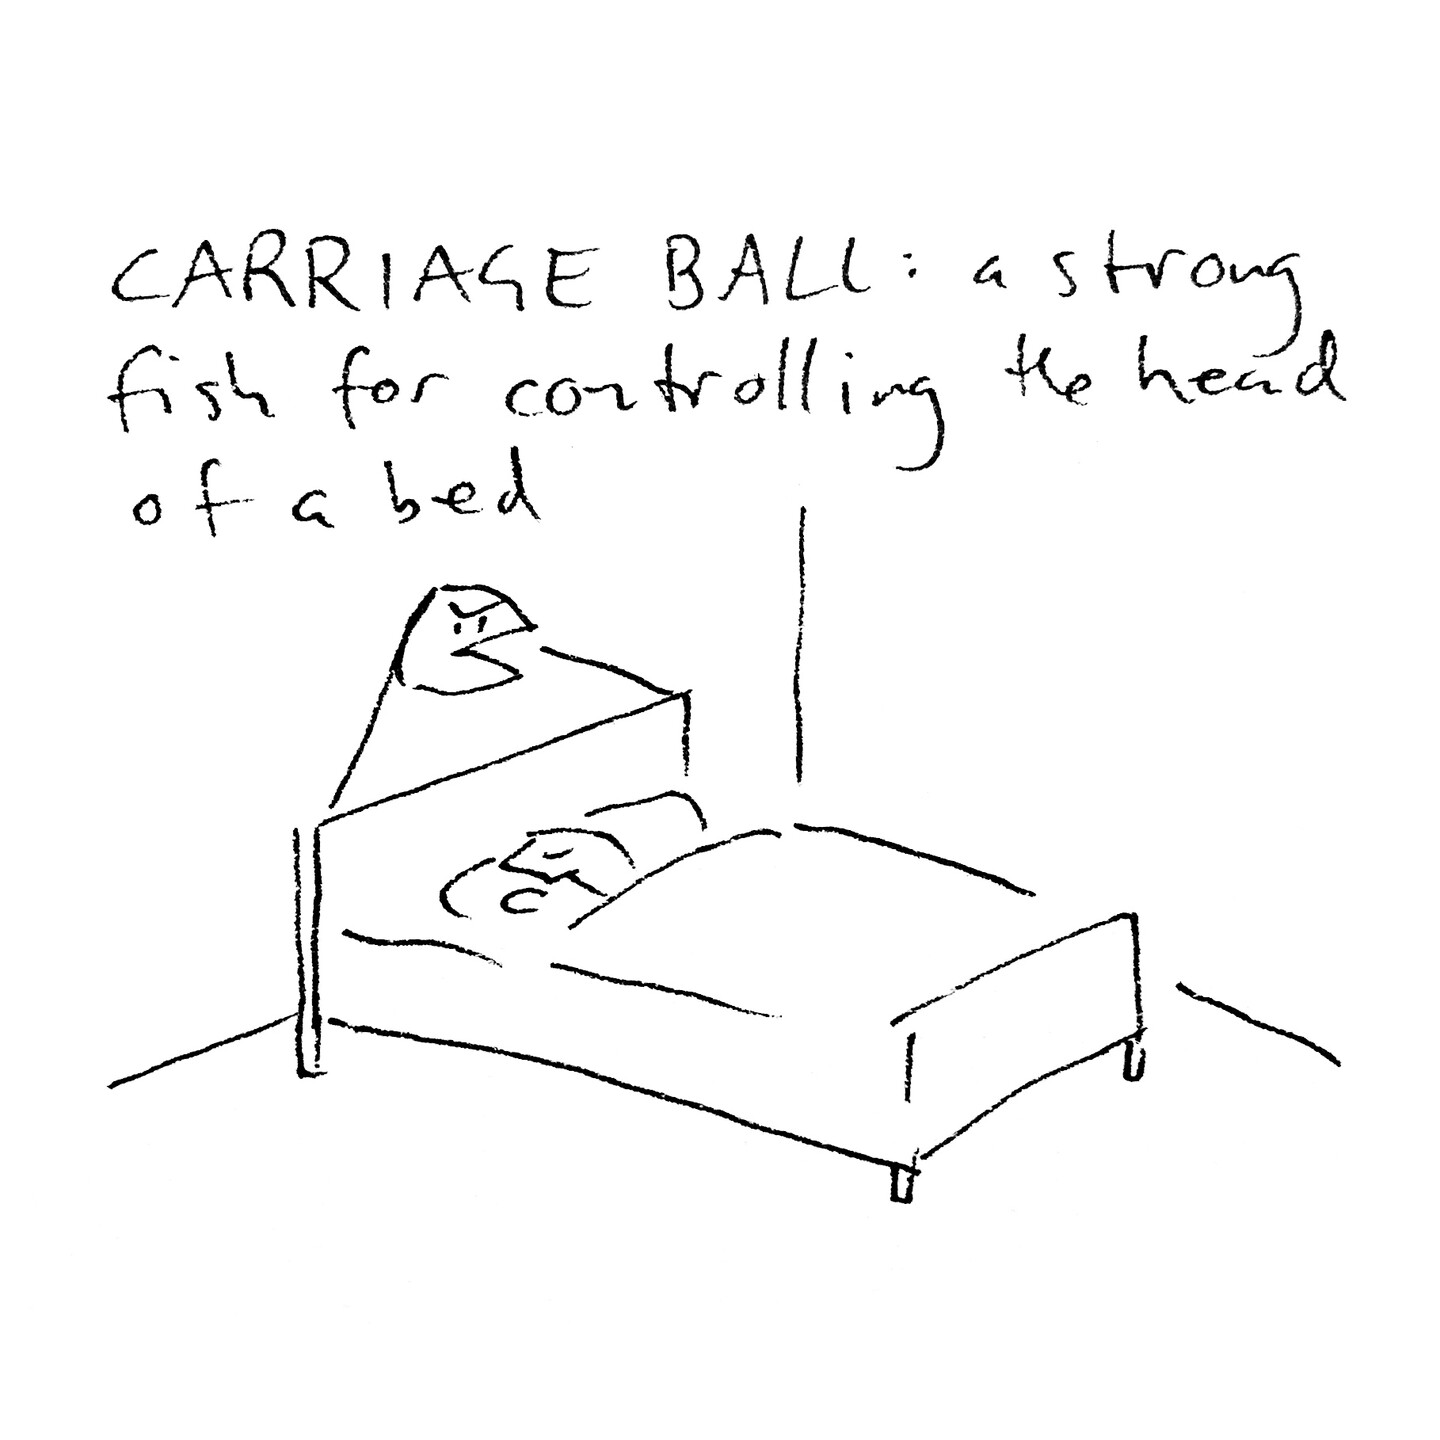 CARRIAGE BALL: a strong fish for controlling the head of a bed. The drawing depicts a man asleep in a bed. A fish’s head protrudes from the wall above the bed, with two lines proceeding to the corners of the head.